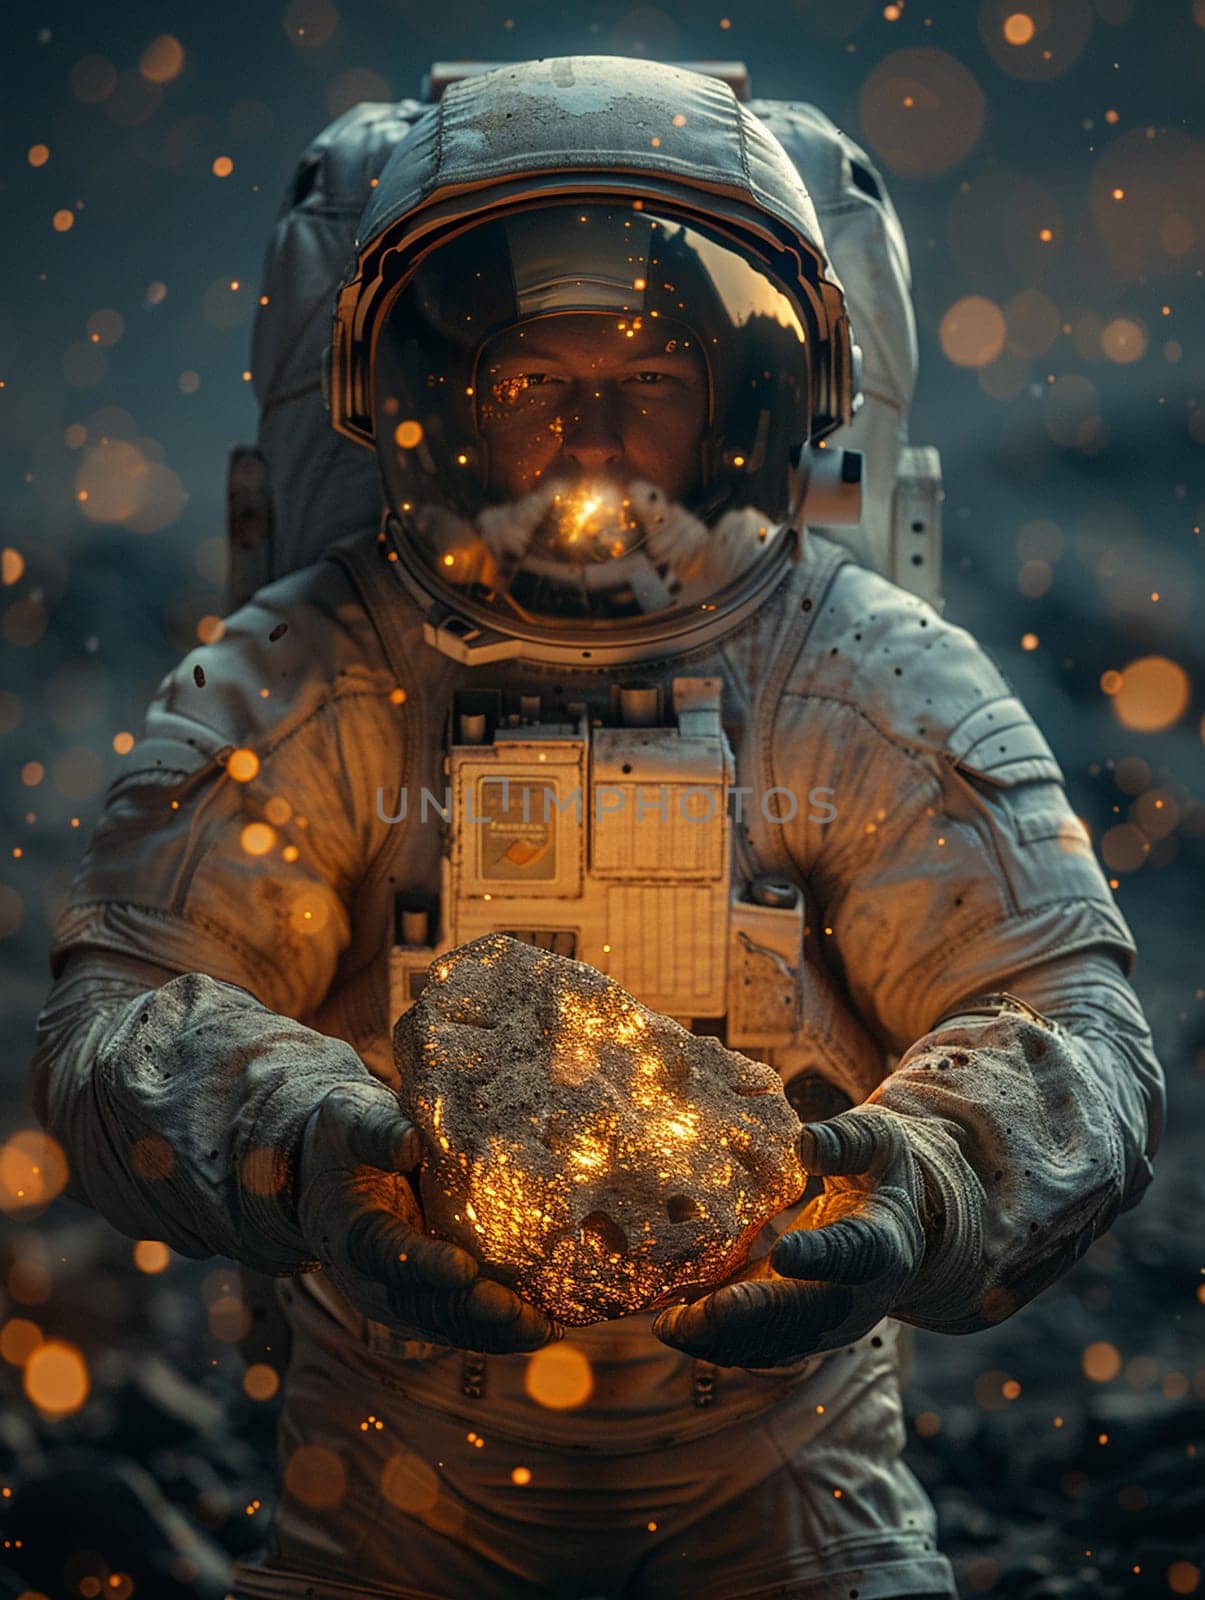 Astronaut's hands holding a martian rock, rendered in a photorealistic style against the backdrop of space.